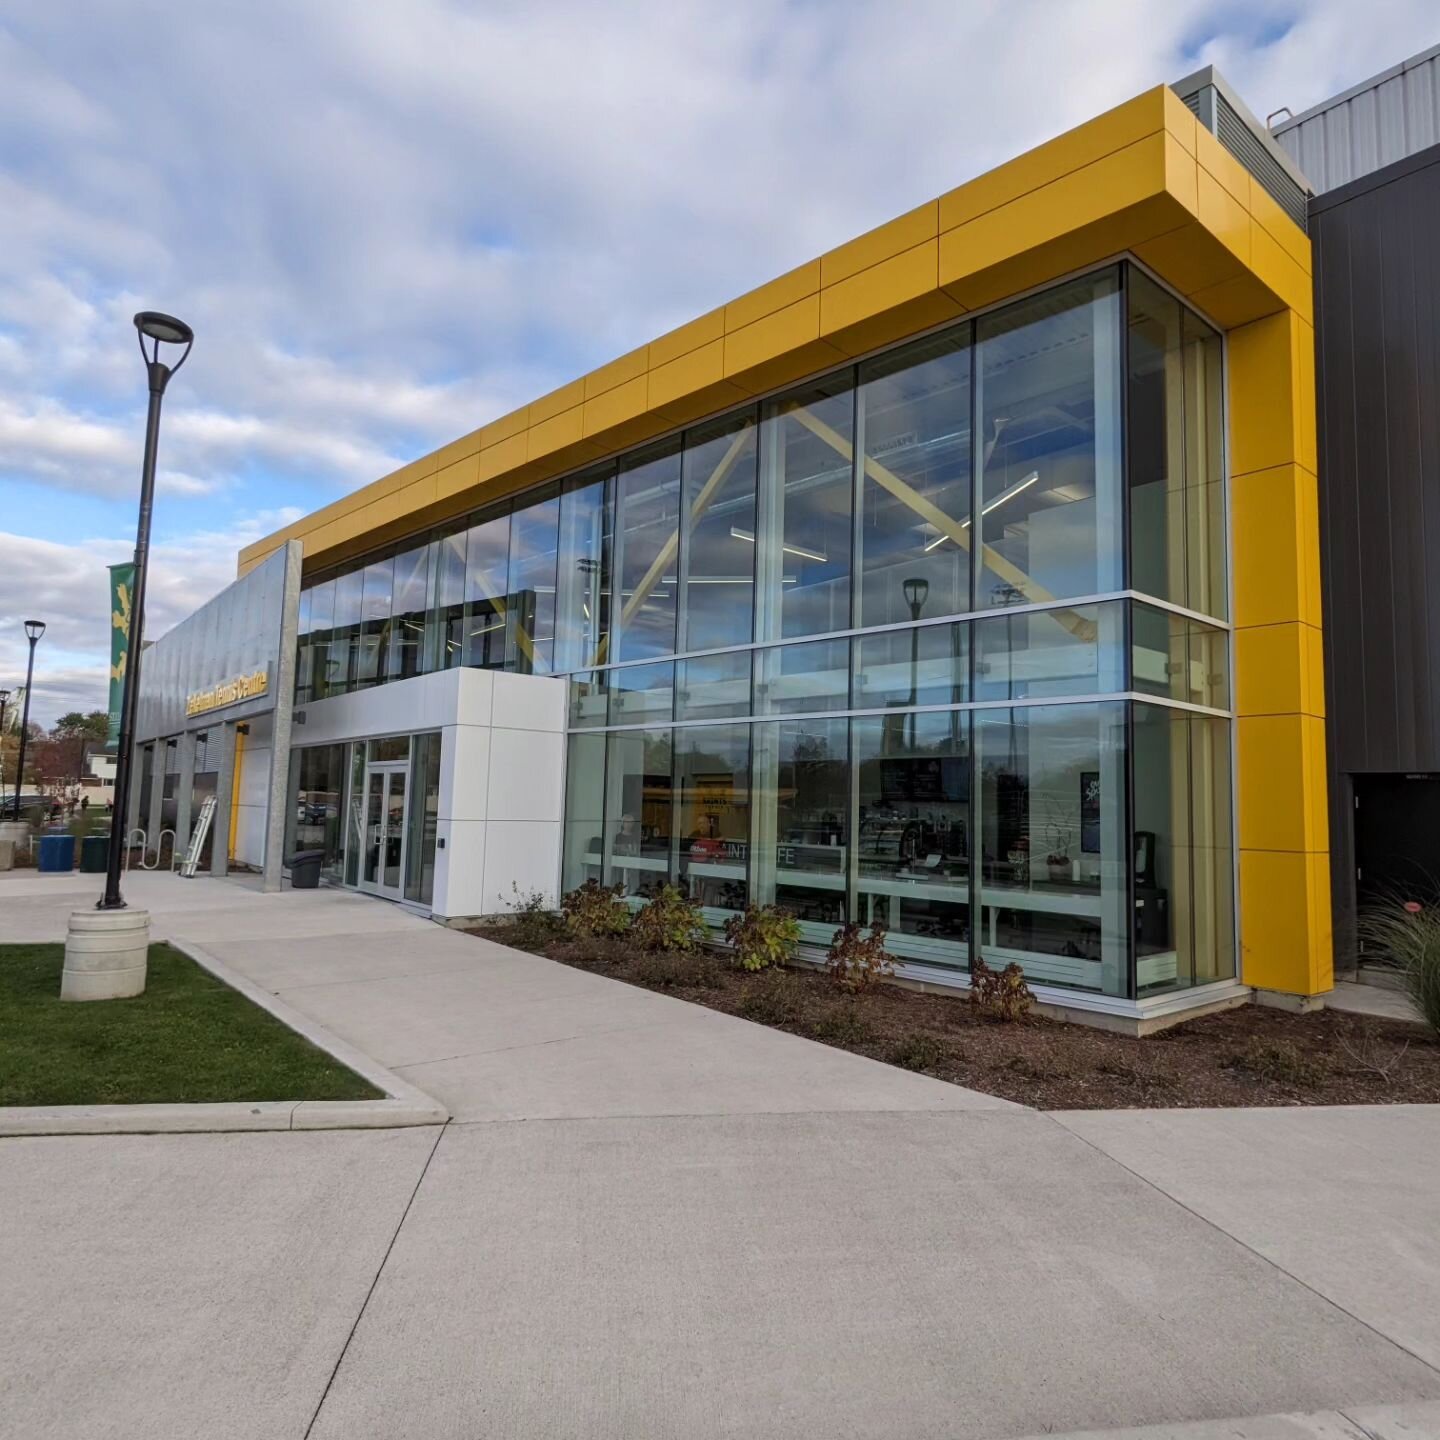 Our team gave the Zekeleman Tennis Centre at @stclaircollege a full interior &amp; exterior window cleaning earlier this week.

#windsorontario #windsoressex #yqg #yqgbusiness